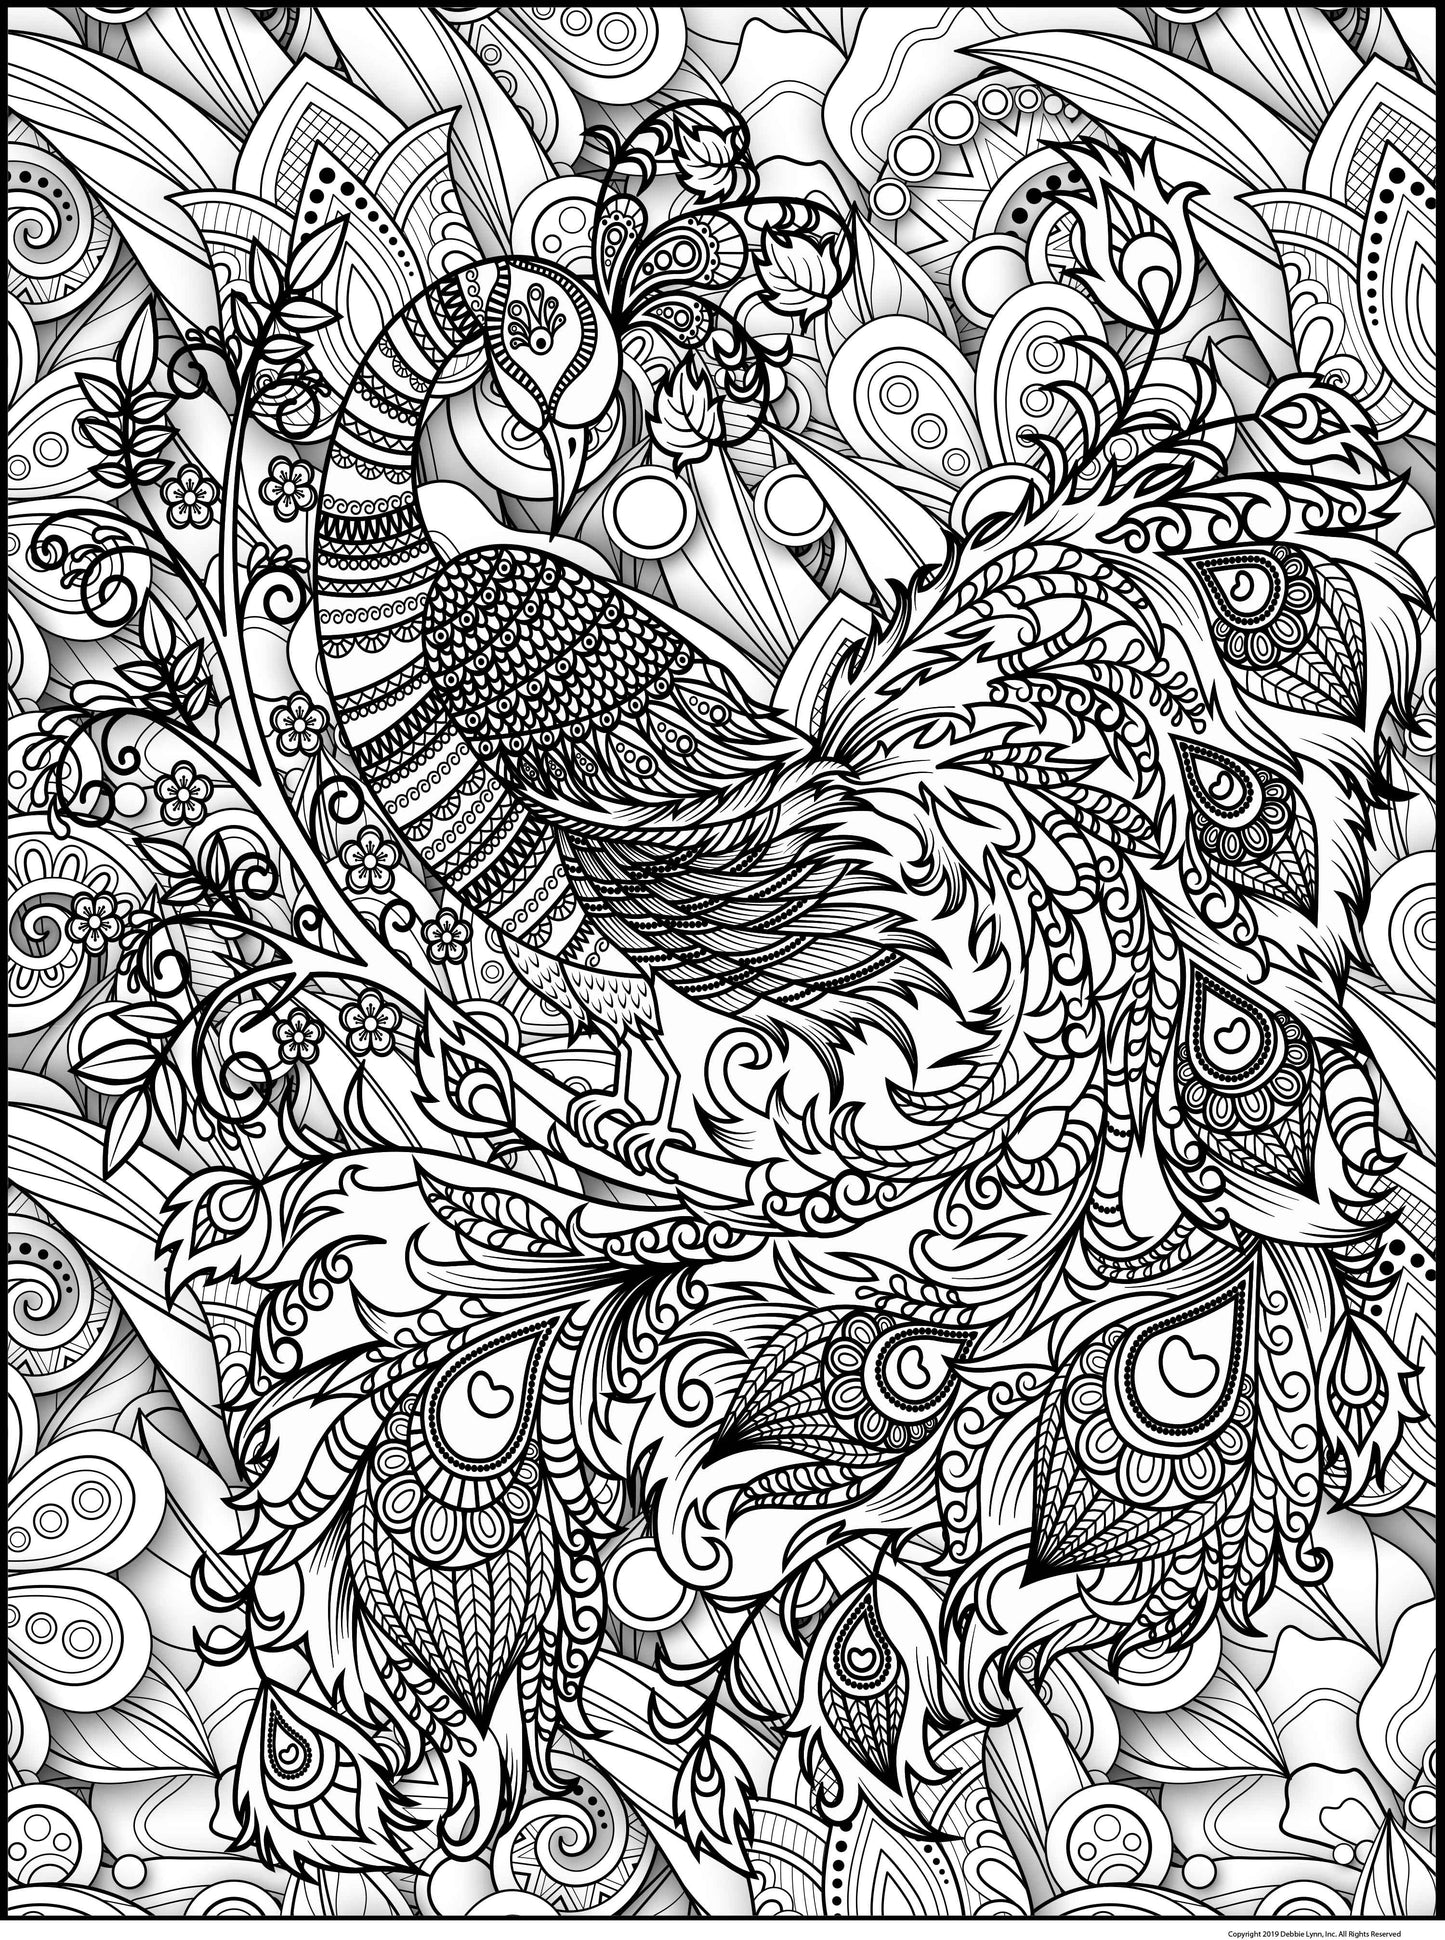 Peacock Personalized Giant Coloring Poster 46"x60"